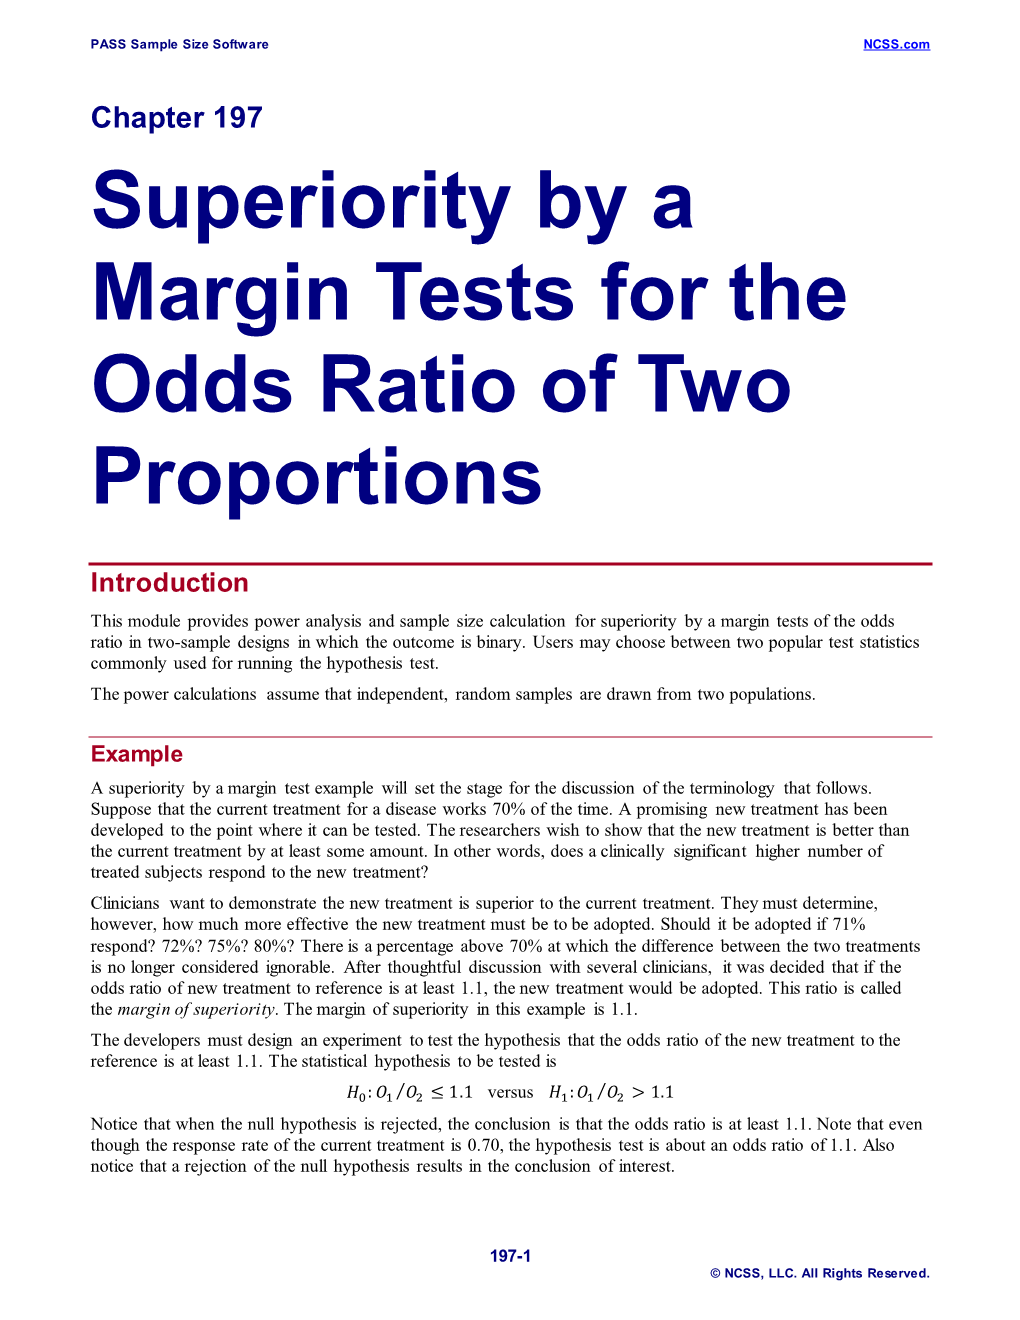 Superiority by a Margin Tests for the Odds Ratio of Two Proportions